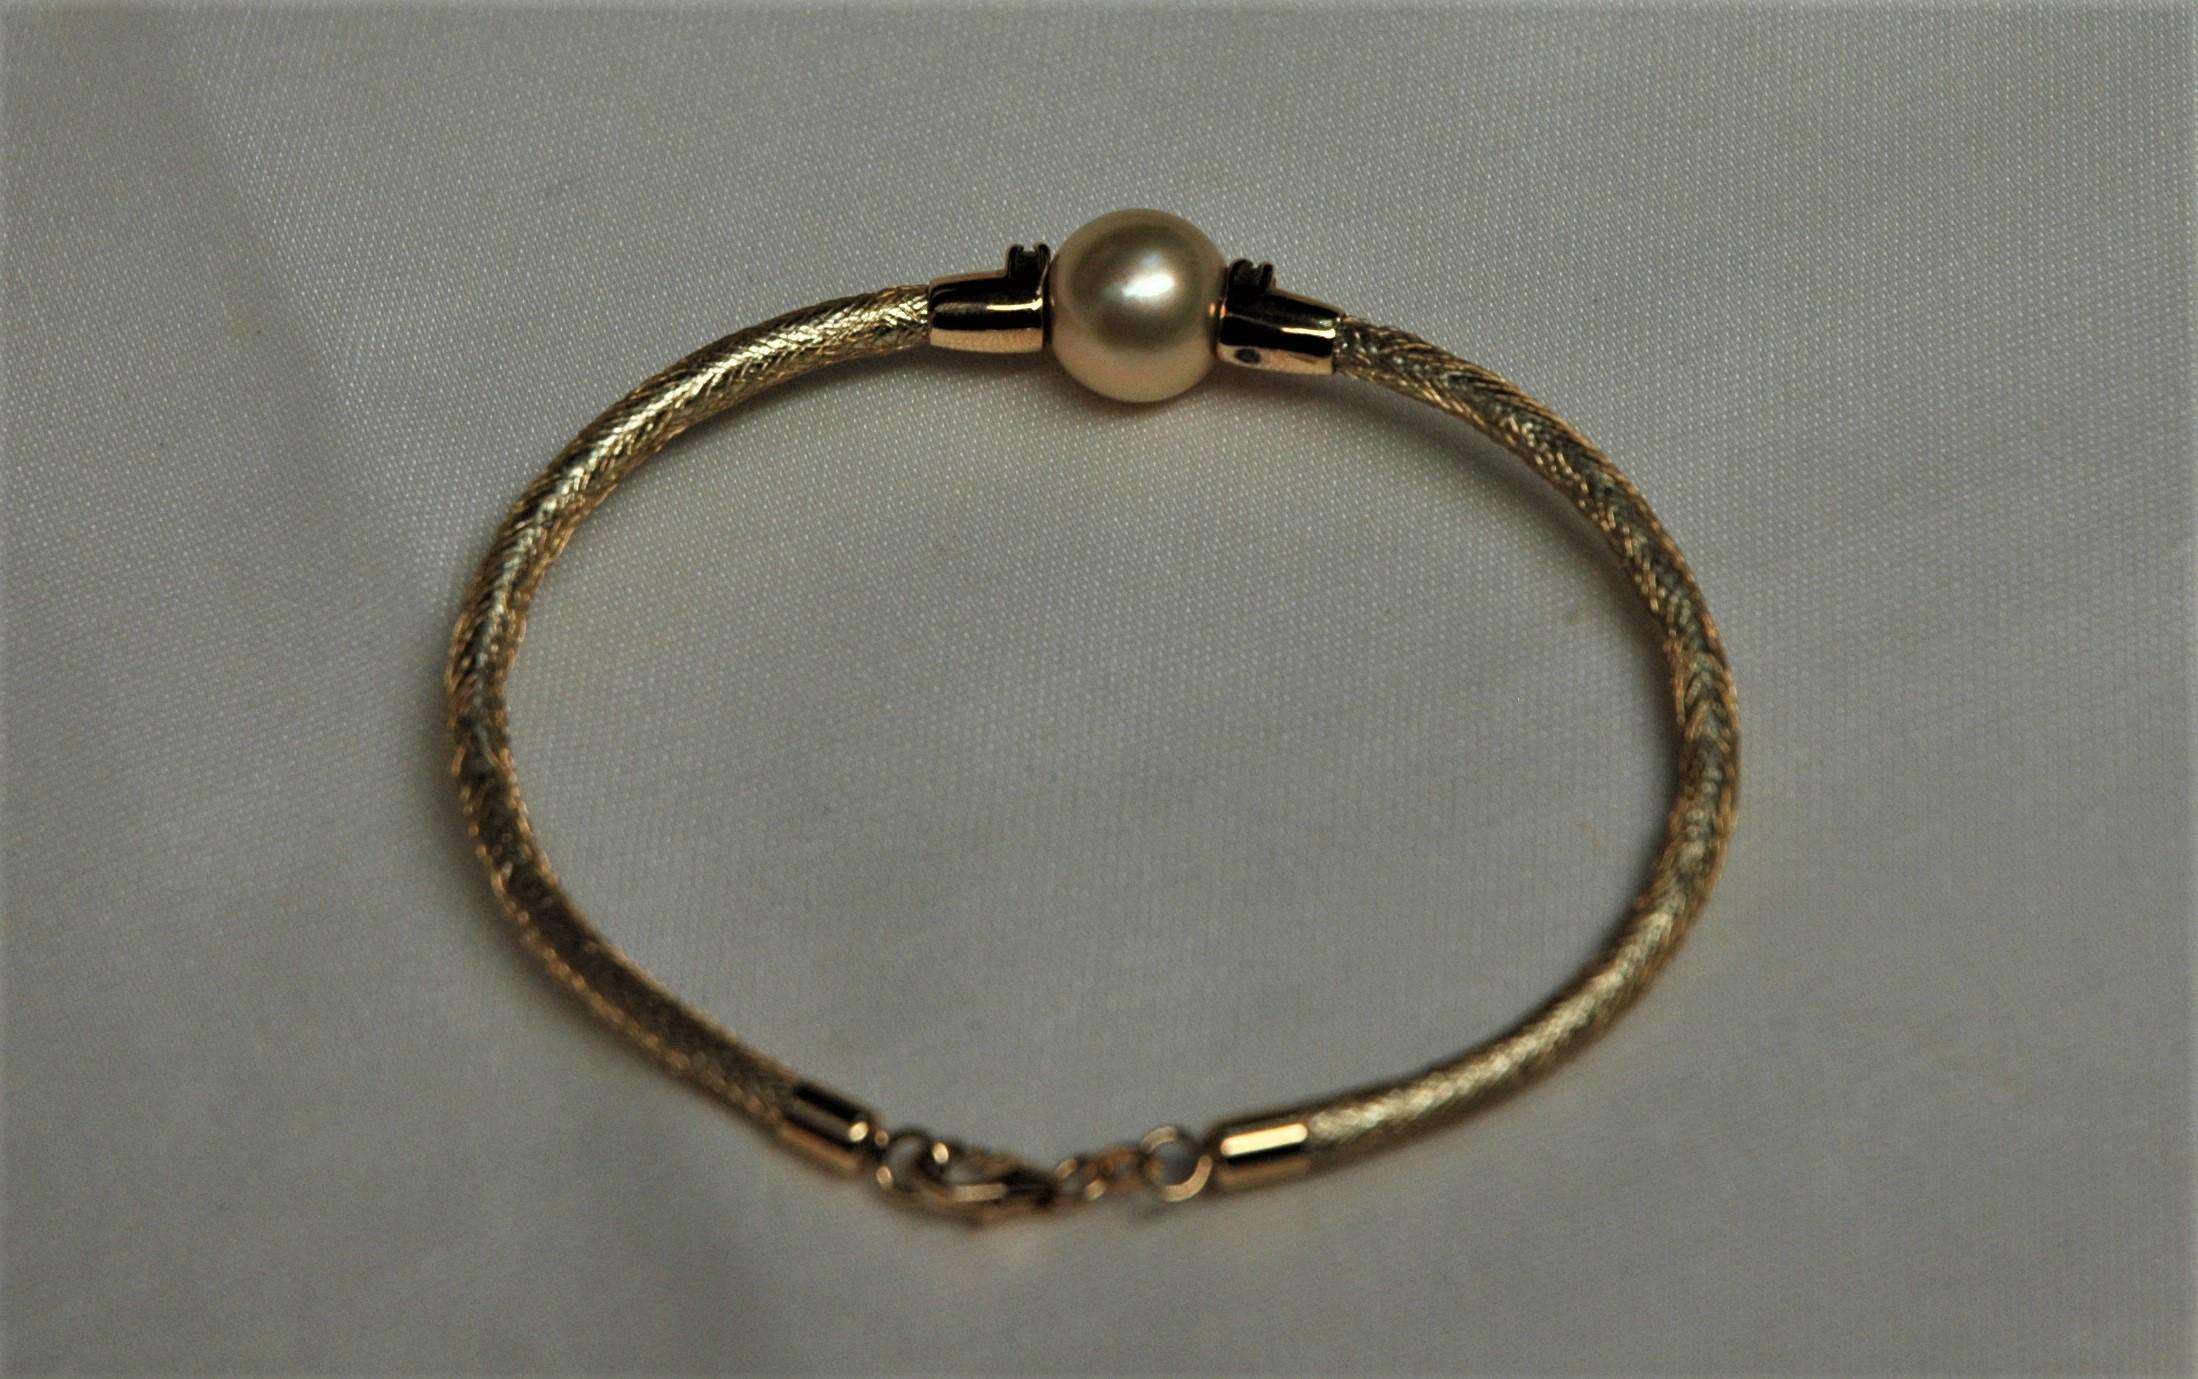 Brilliant Cut 18 Kt. Gold Bracelets with Pearls and Diamonds